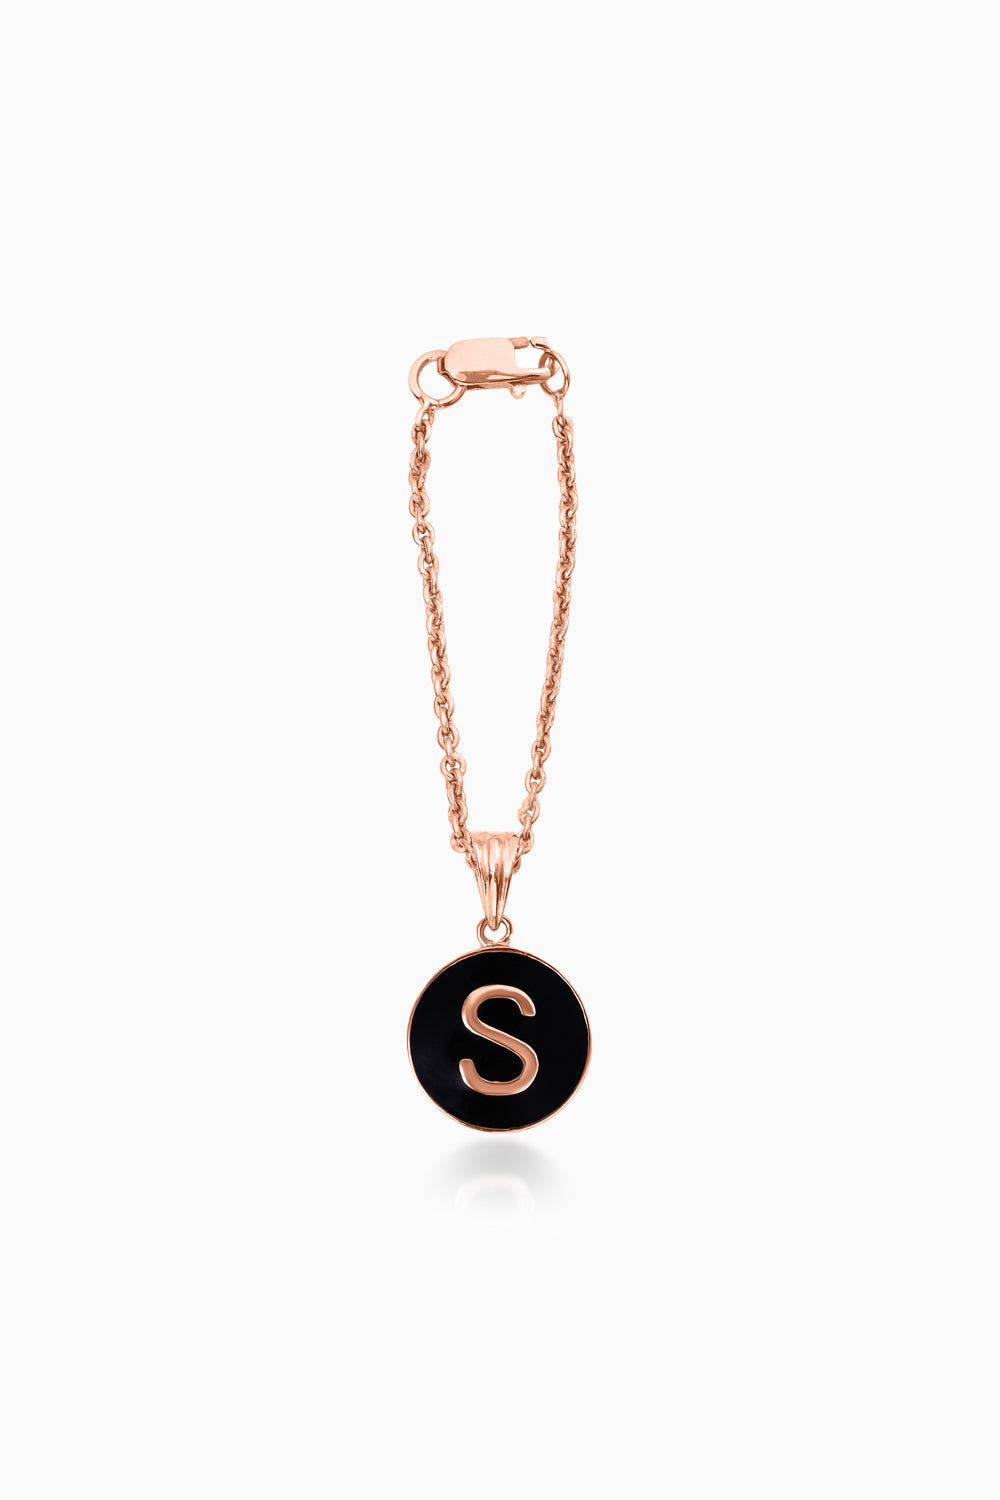 Personalised Enamel Chain Watch 14KT Gold Charm